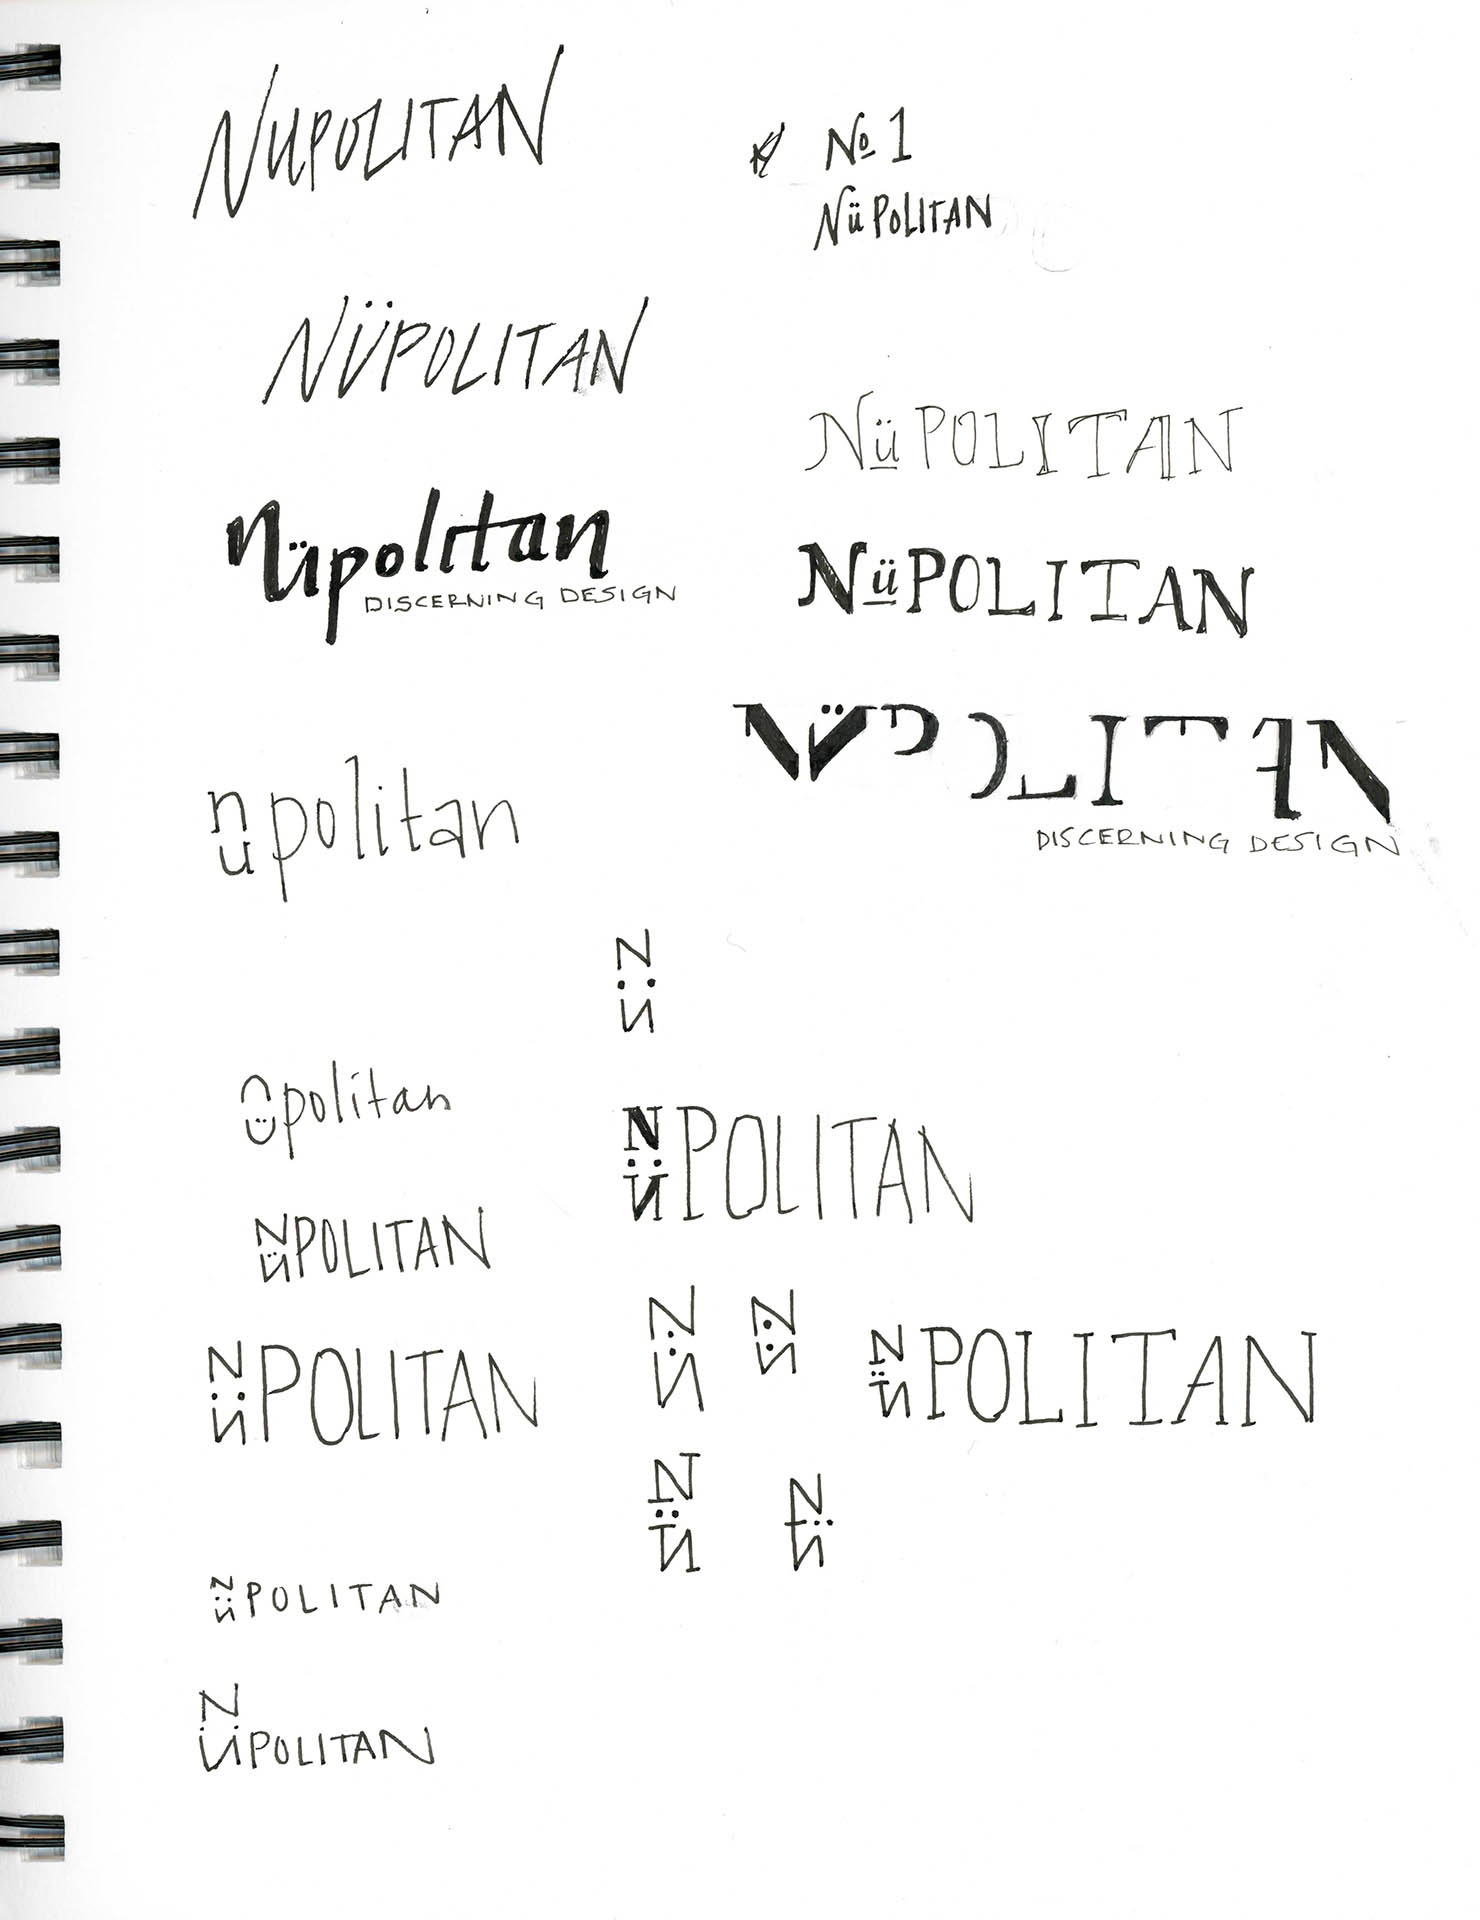 Scan of sketchbook page with iterations for Nüpolitan logo